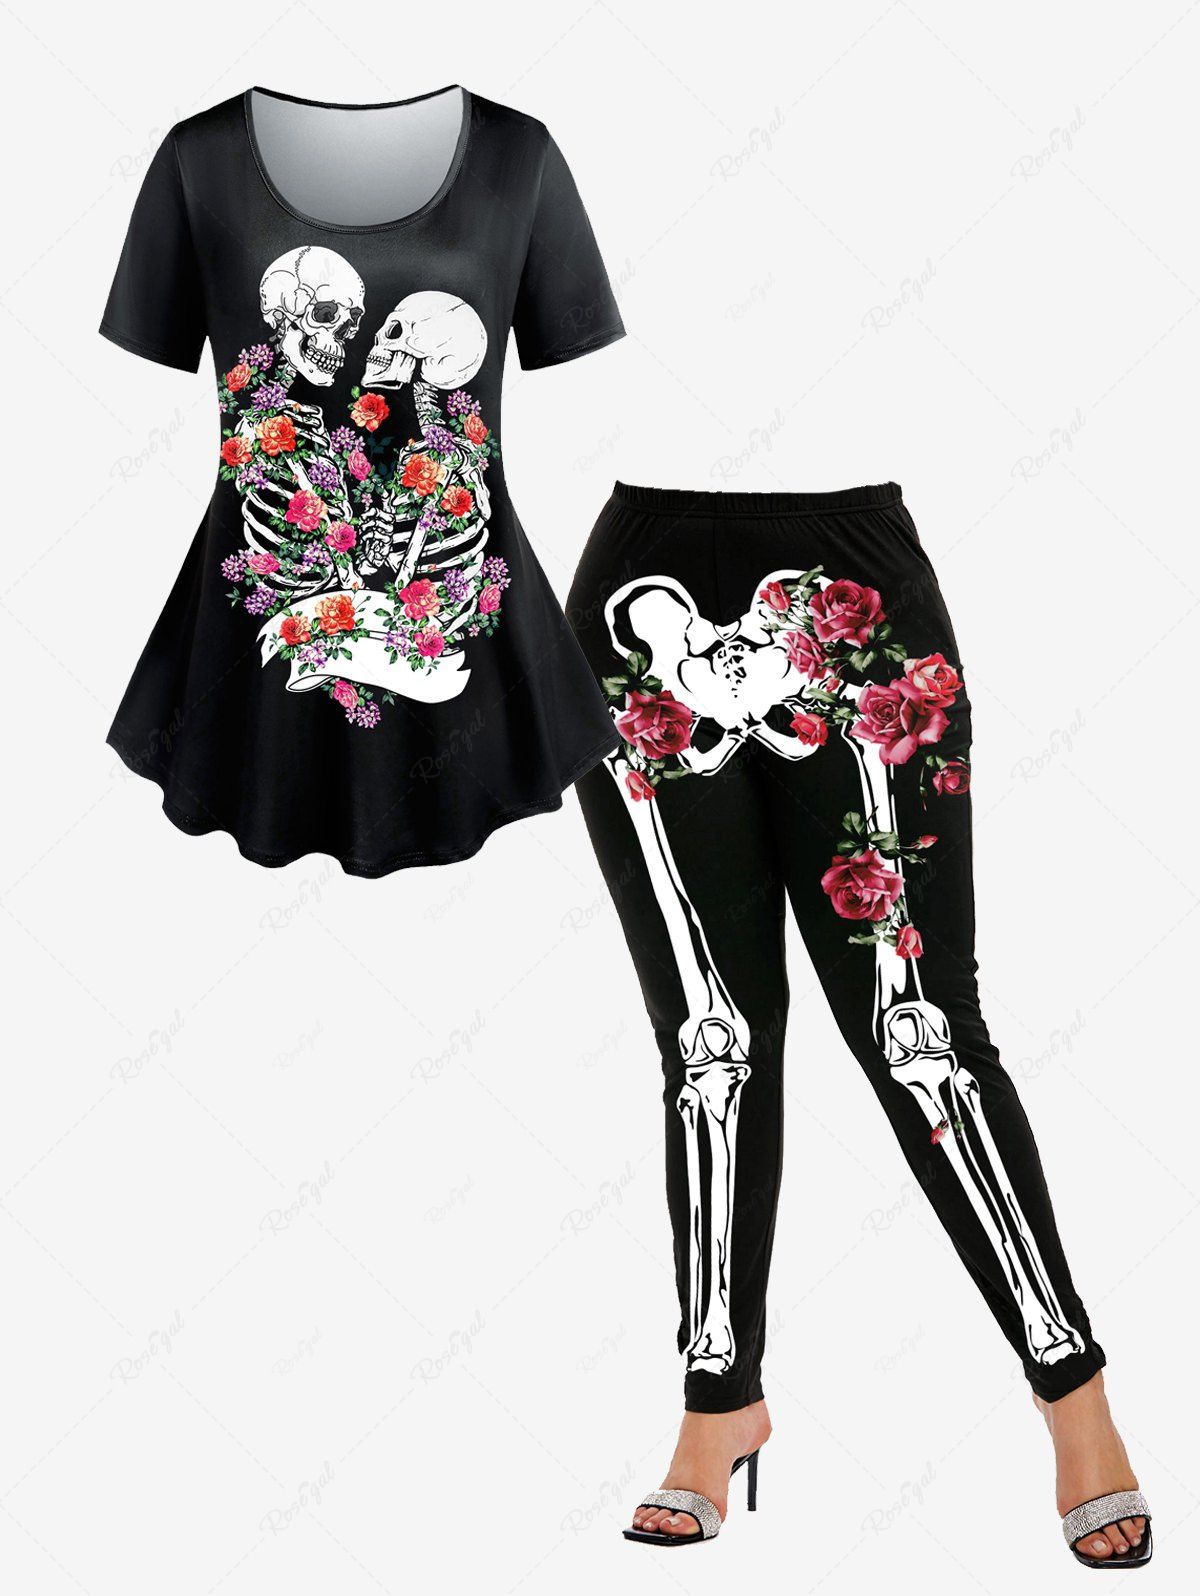 Cheap Halloween Costume Skull Rose Print Tee and Skeleton Print Leggings Plus Size Outfit  